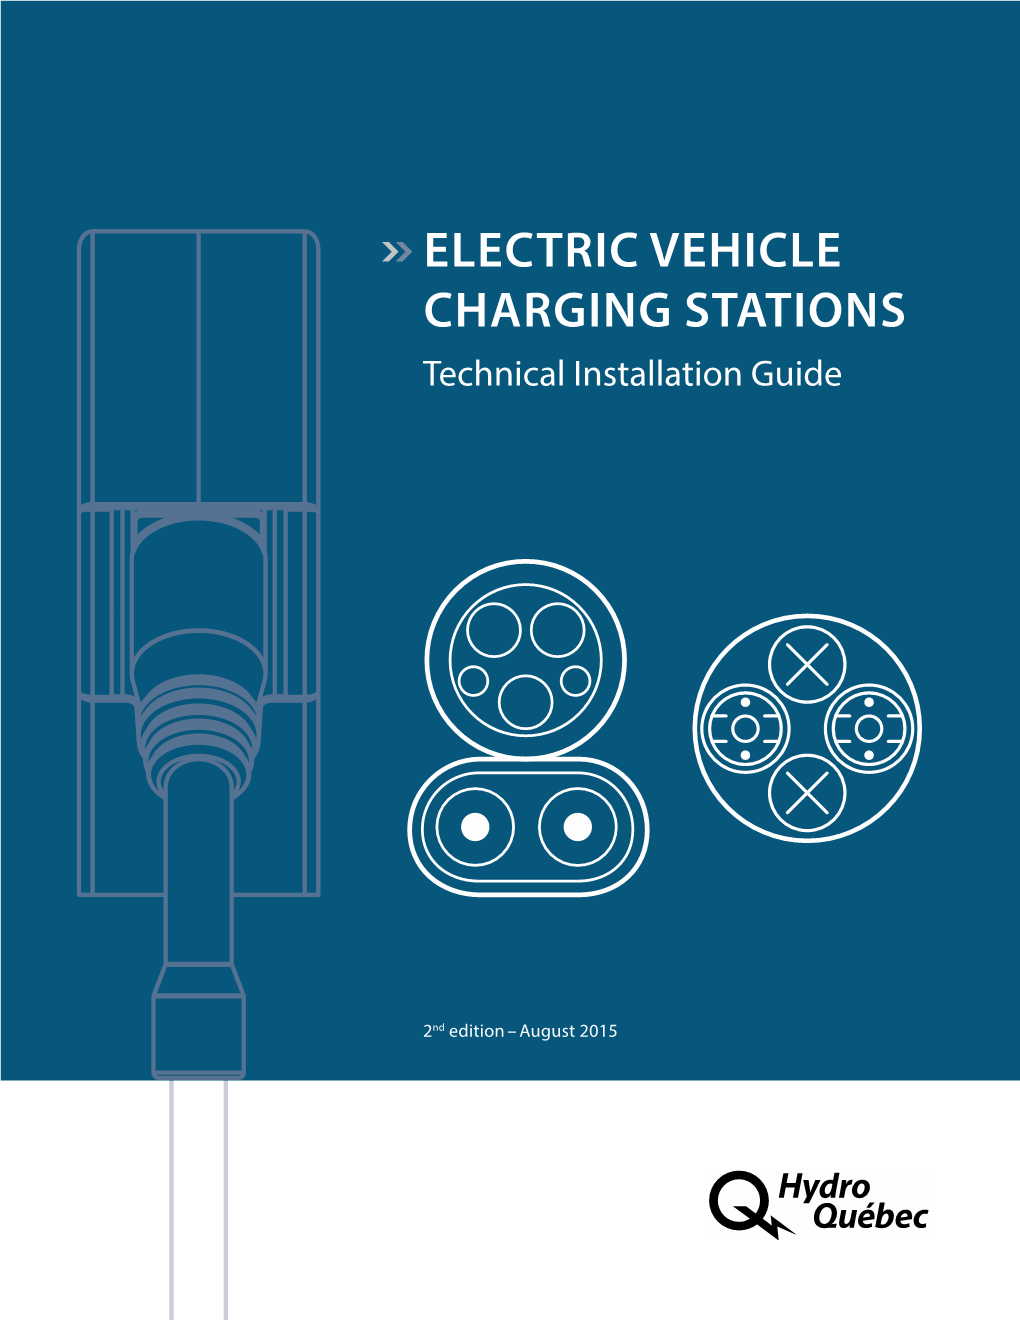 ELECTRIC VEHICLE CHARGING STATIONS Technical Installation Guide